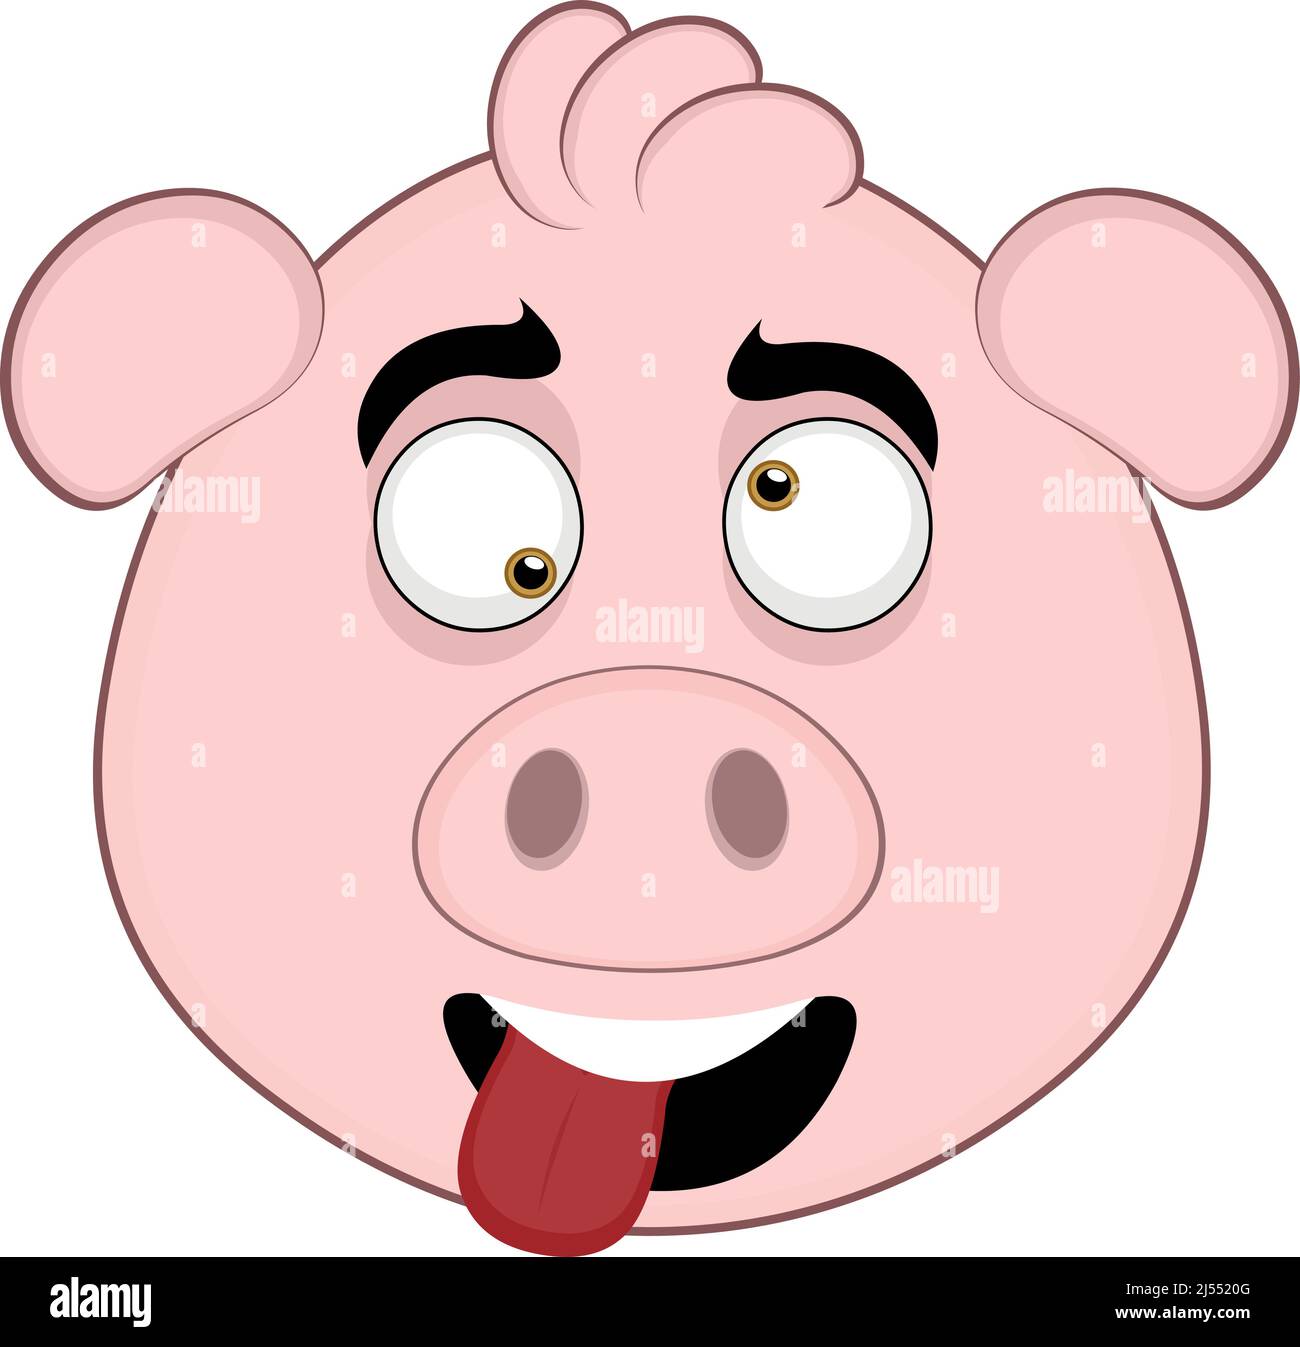 Vector illustration of the face of a cartoon pig with a crazy expression Stock Vector